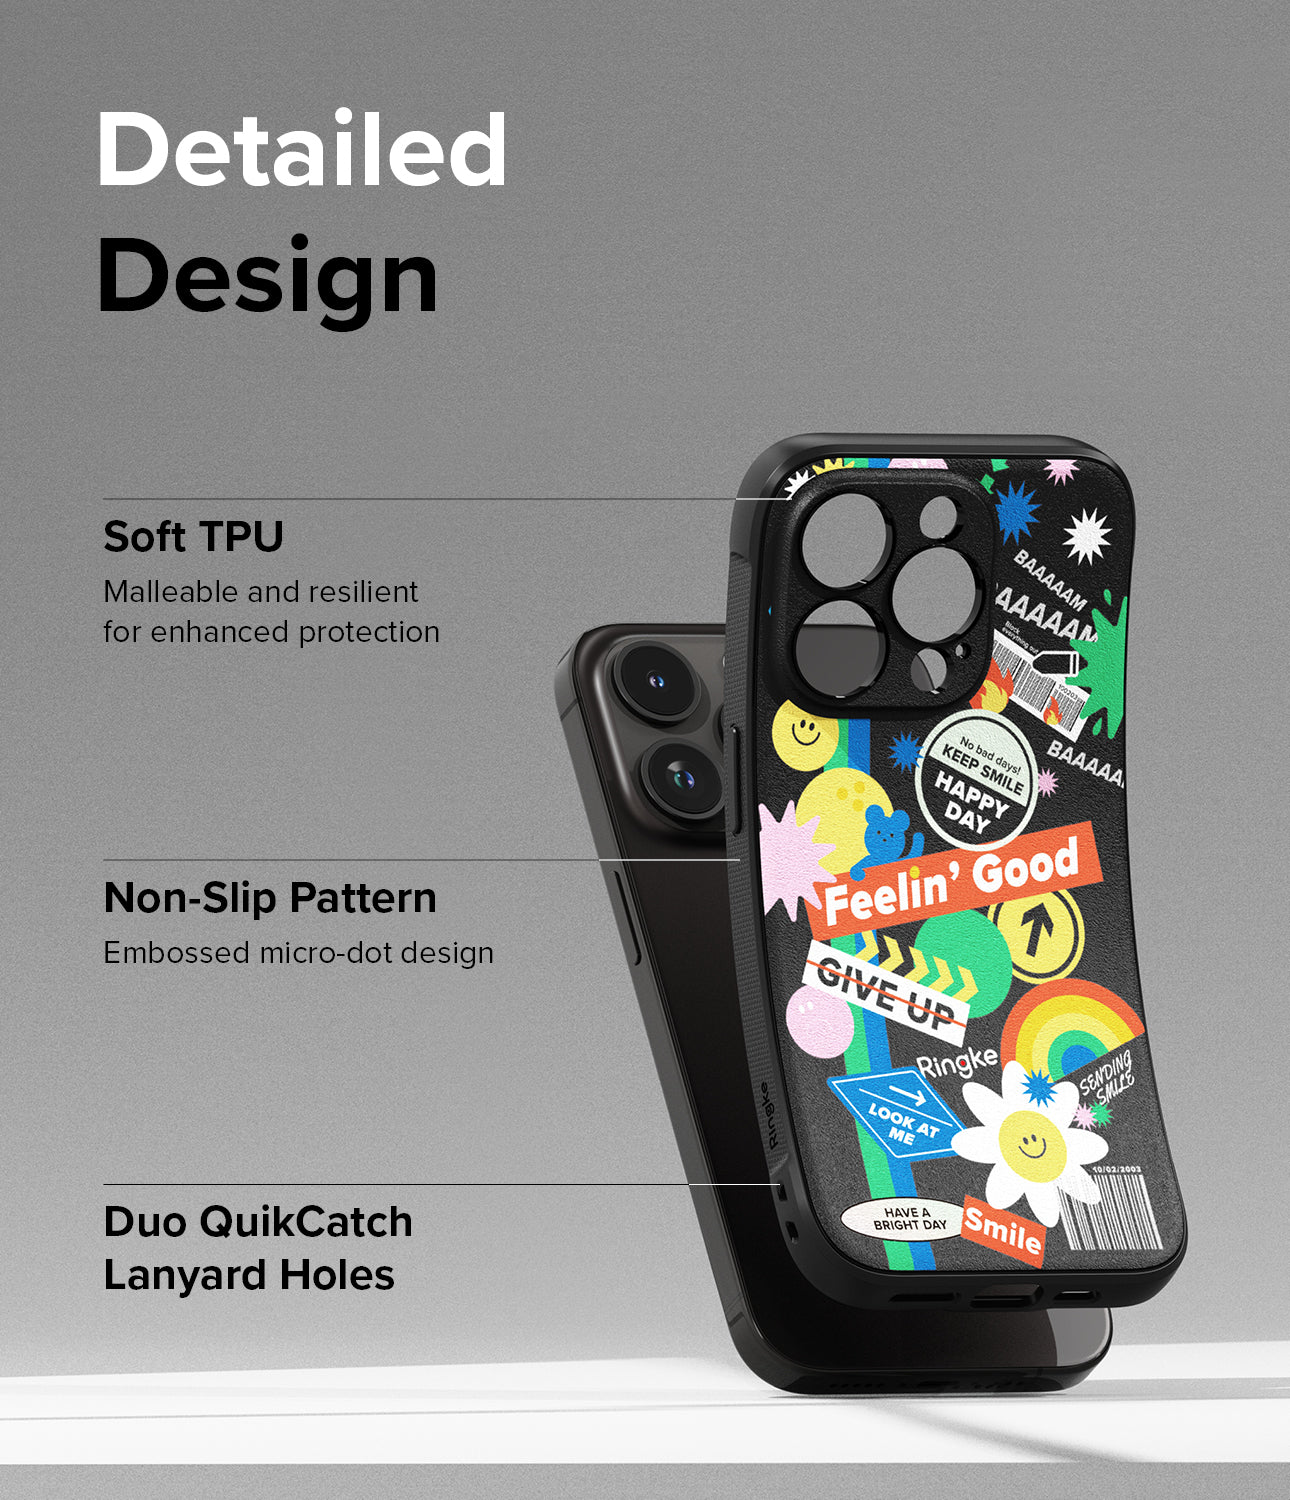 iPhone 15 Pro Case | Onyx Design - Sticker - Detailed Design. Malleable and resilient for enhanced protection with Soft TPU. Embossed micro-dot design with Non-Slip Pattern. Duo QuikCatch Lanyard Holes.